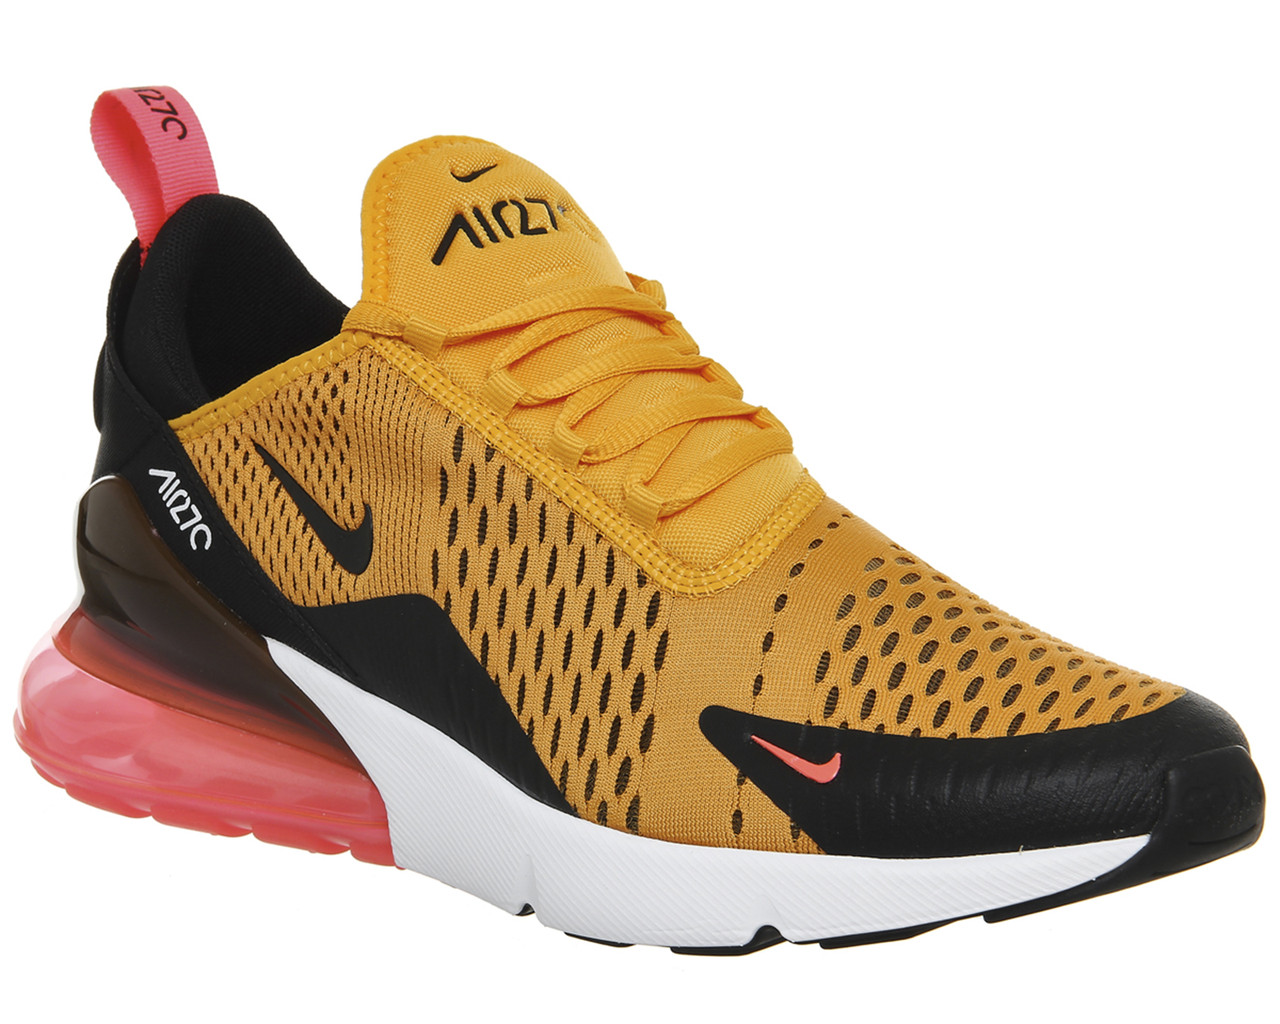 air max 270 tiger release date